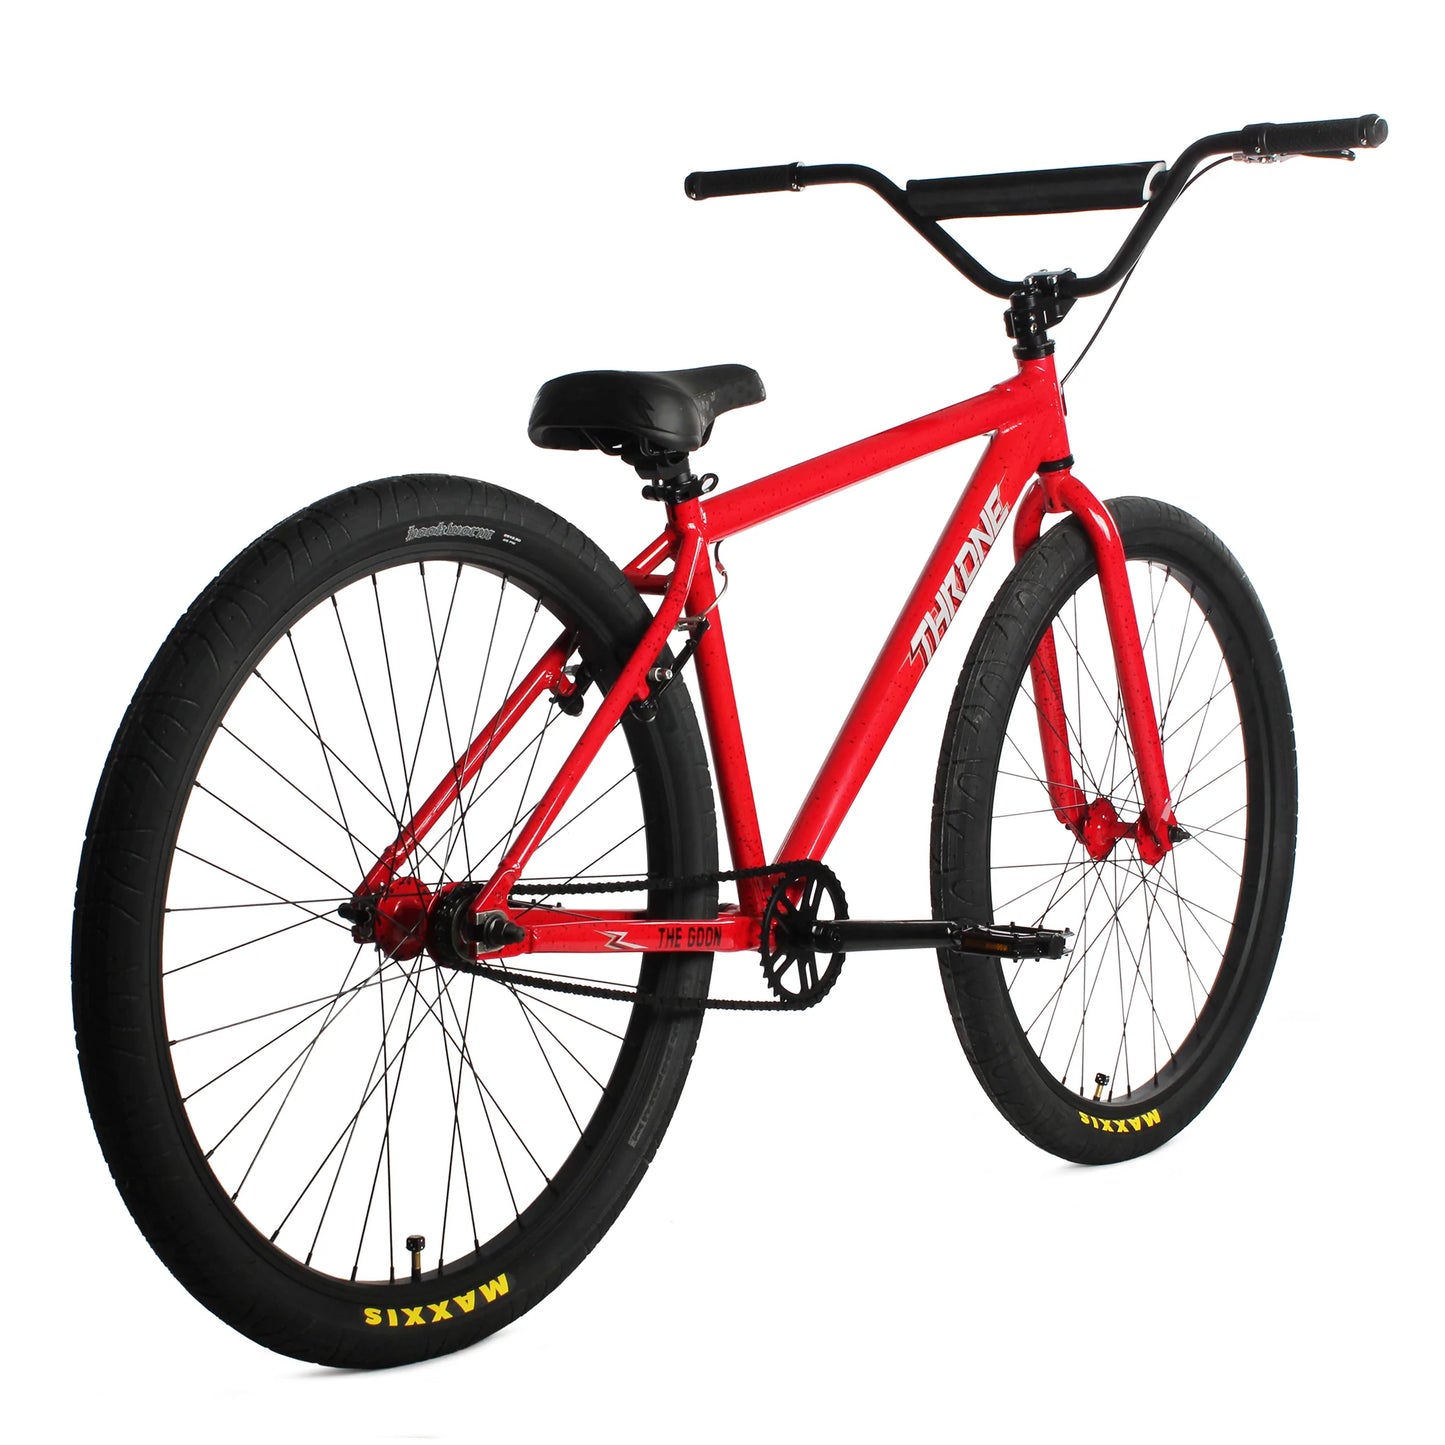 Throne Cycles The Goon - Fire Red | Fixed Gear Urban BMX Bike | Urban Bike | The Goon Cycle | Throne Cycle | Street Cycle | Throne BMX | BMX Bike | Bike Lover USA